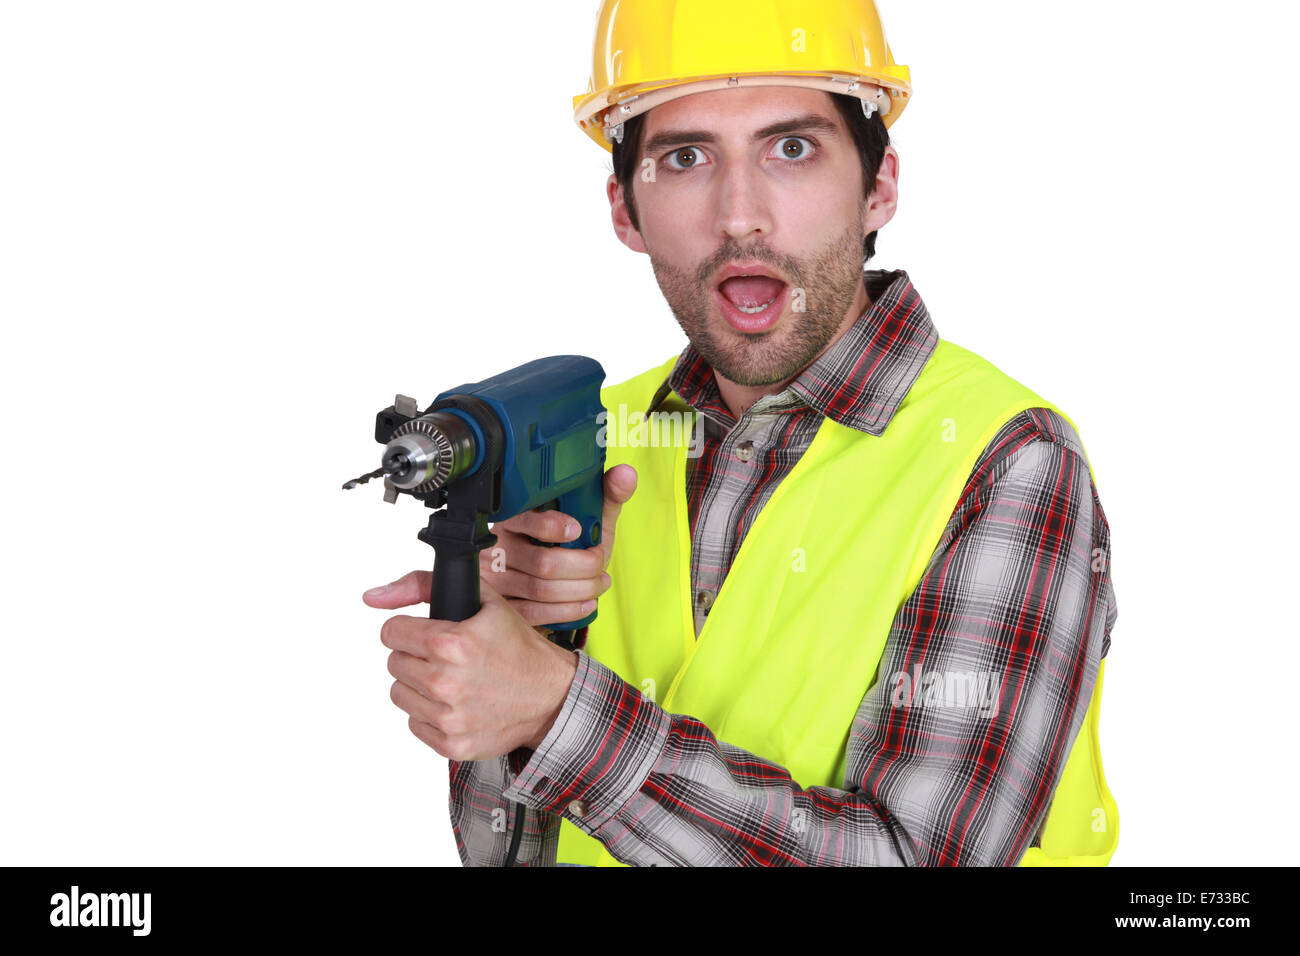 A man holding a drill with a weird facial expression. Stock Photo